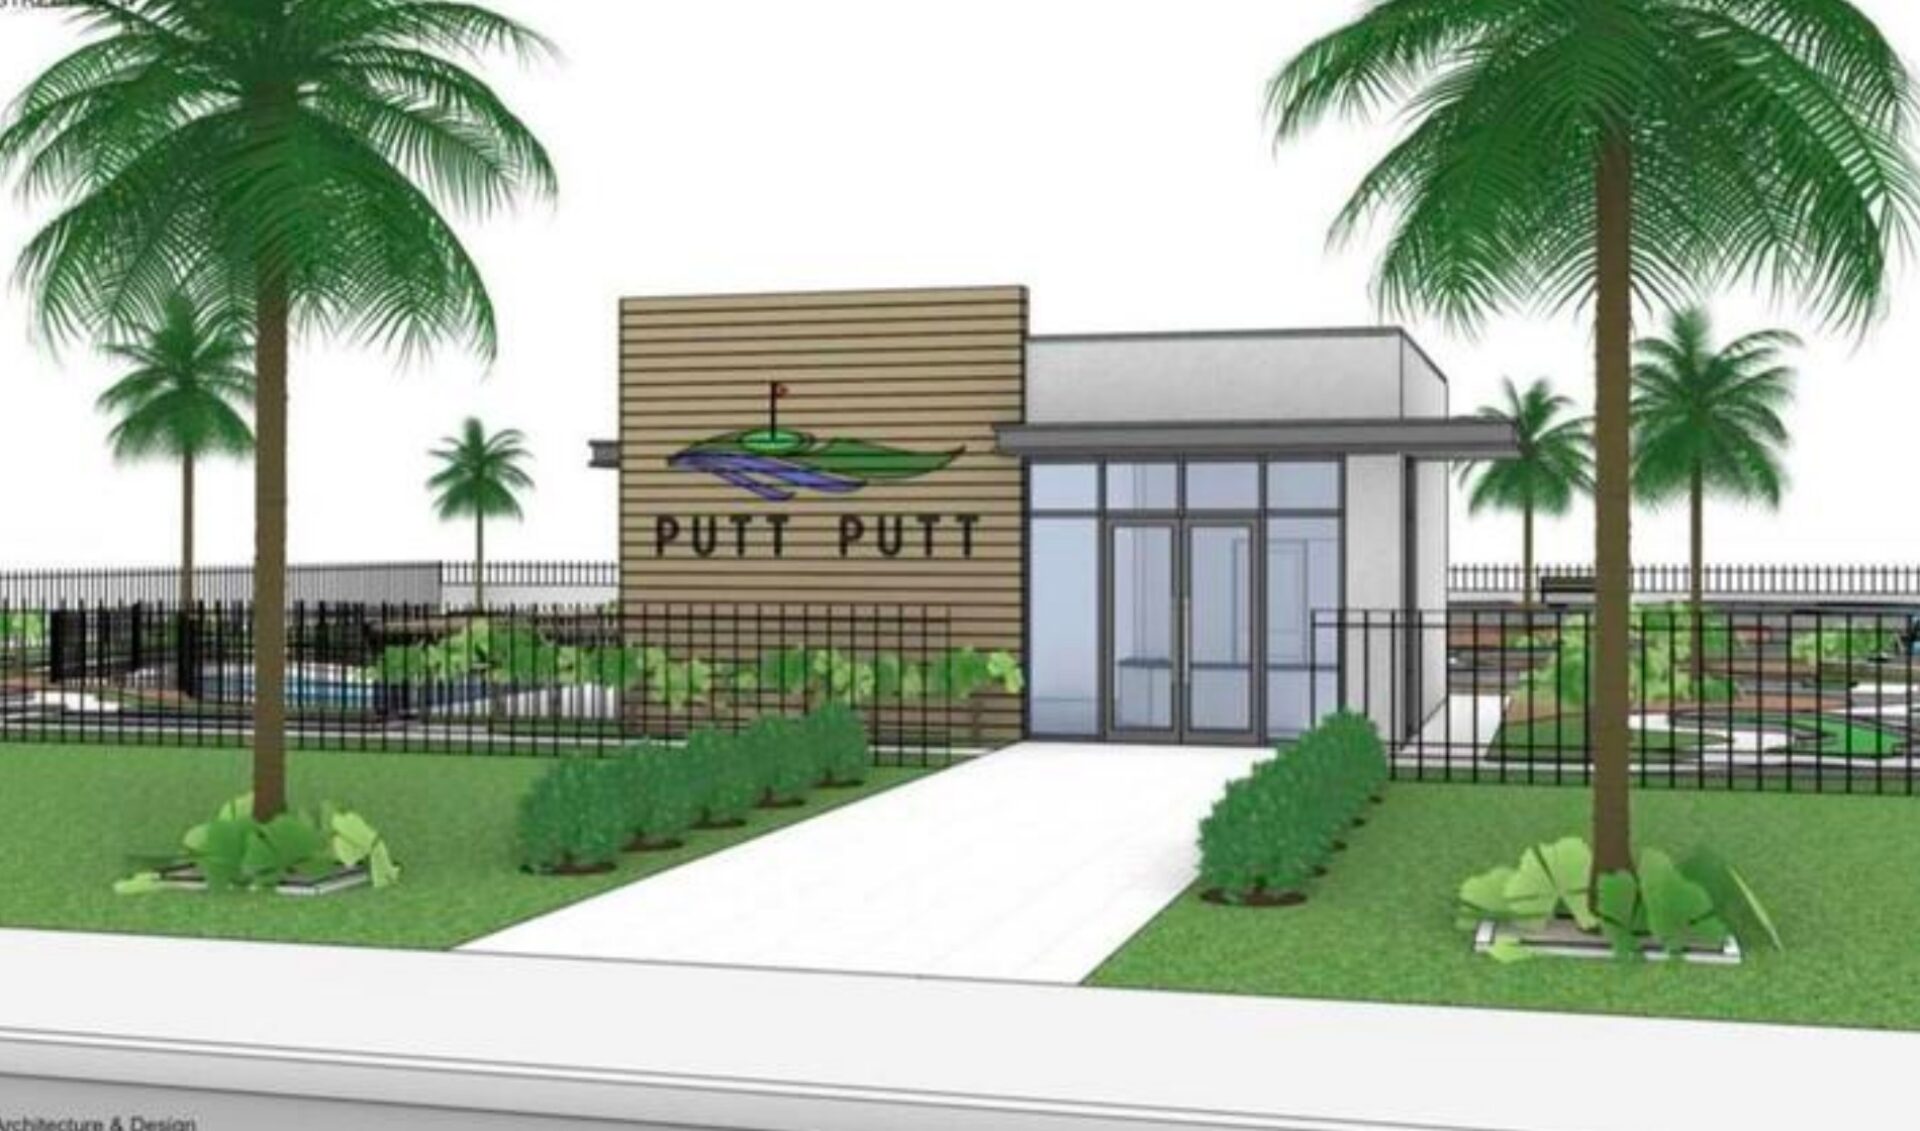 Danny Duncan says there’s not much to do in his hometown. So he’s opening a putt putt course.